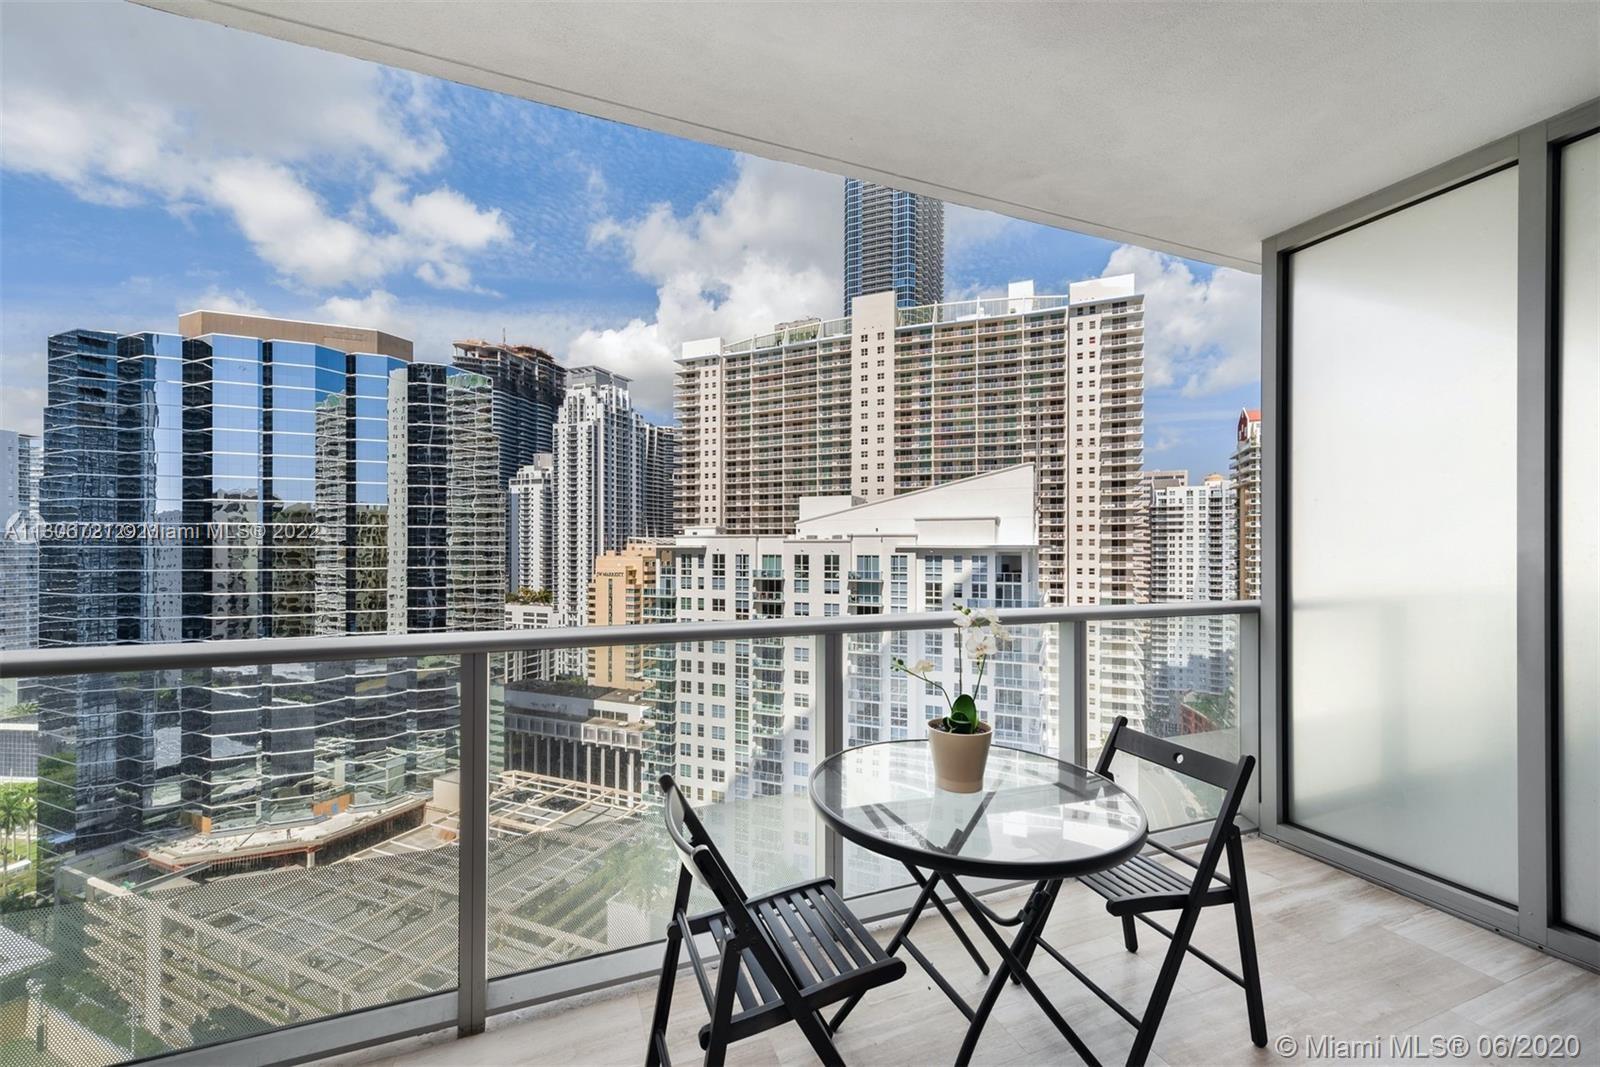 Beautiful studio at Brickell House!!! Over $50K spent in upgrades...includes 2 queen-sized Murphy be